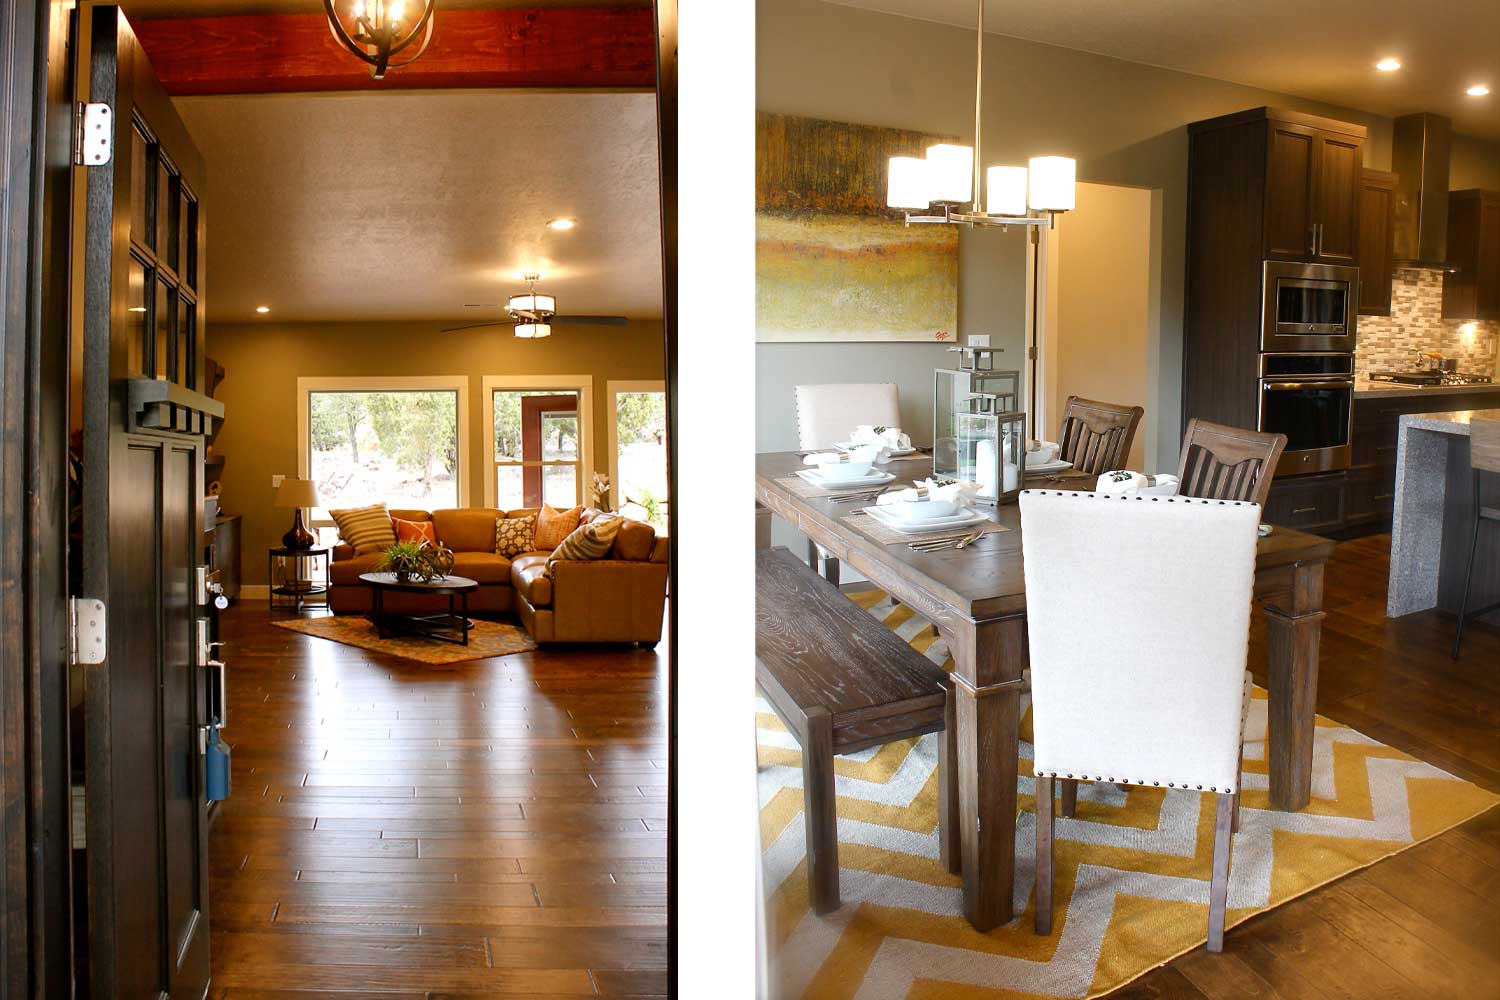 left side of image shows front door open leading to living room couch, right side of image shows dining room table with one bench, two wood chairs, and two white leather chairs